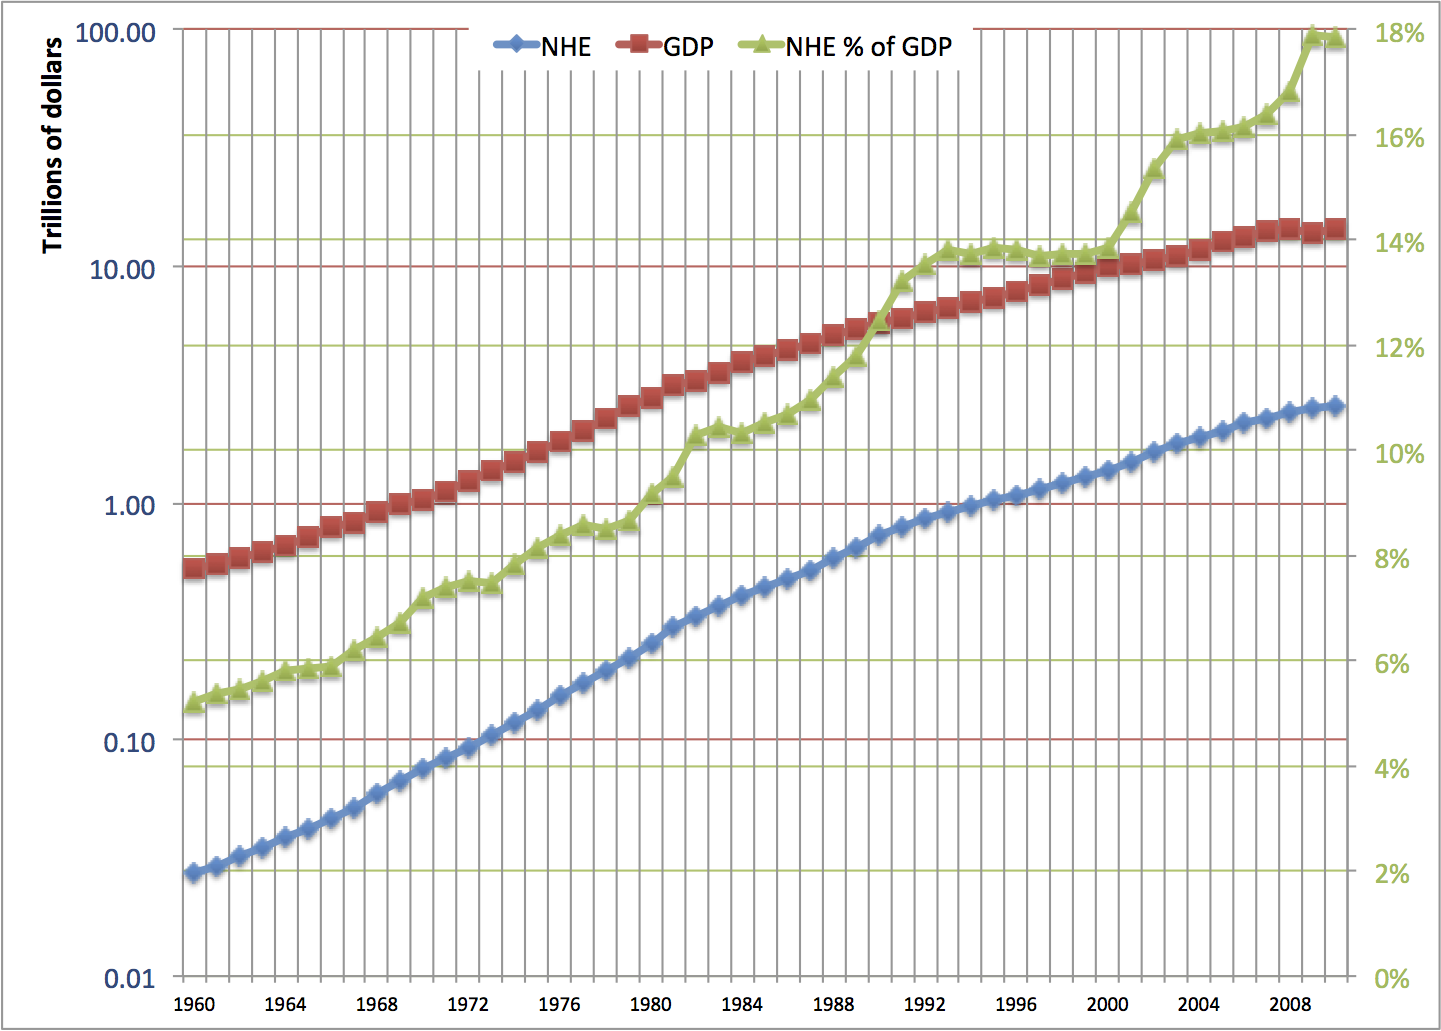 US health spending and GDP